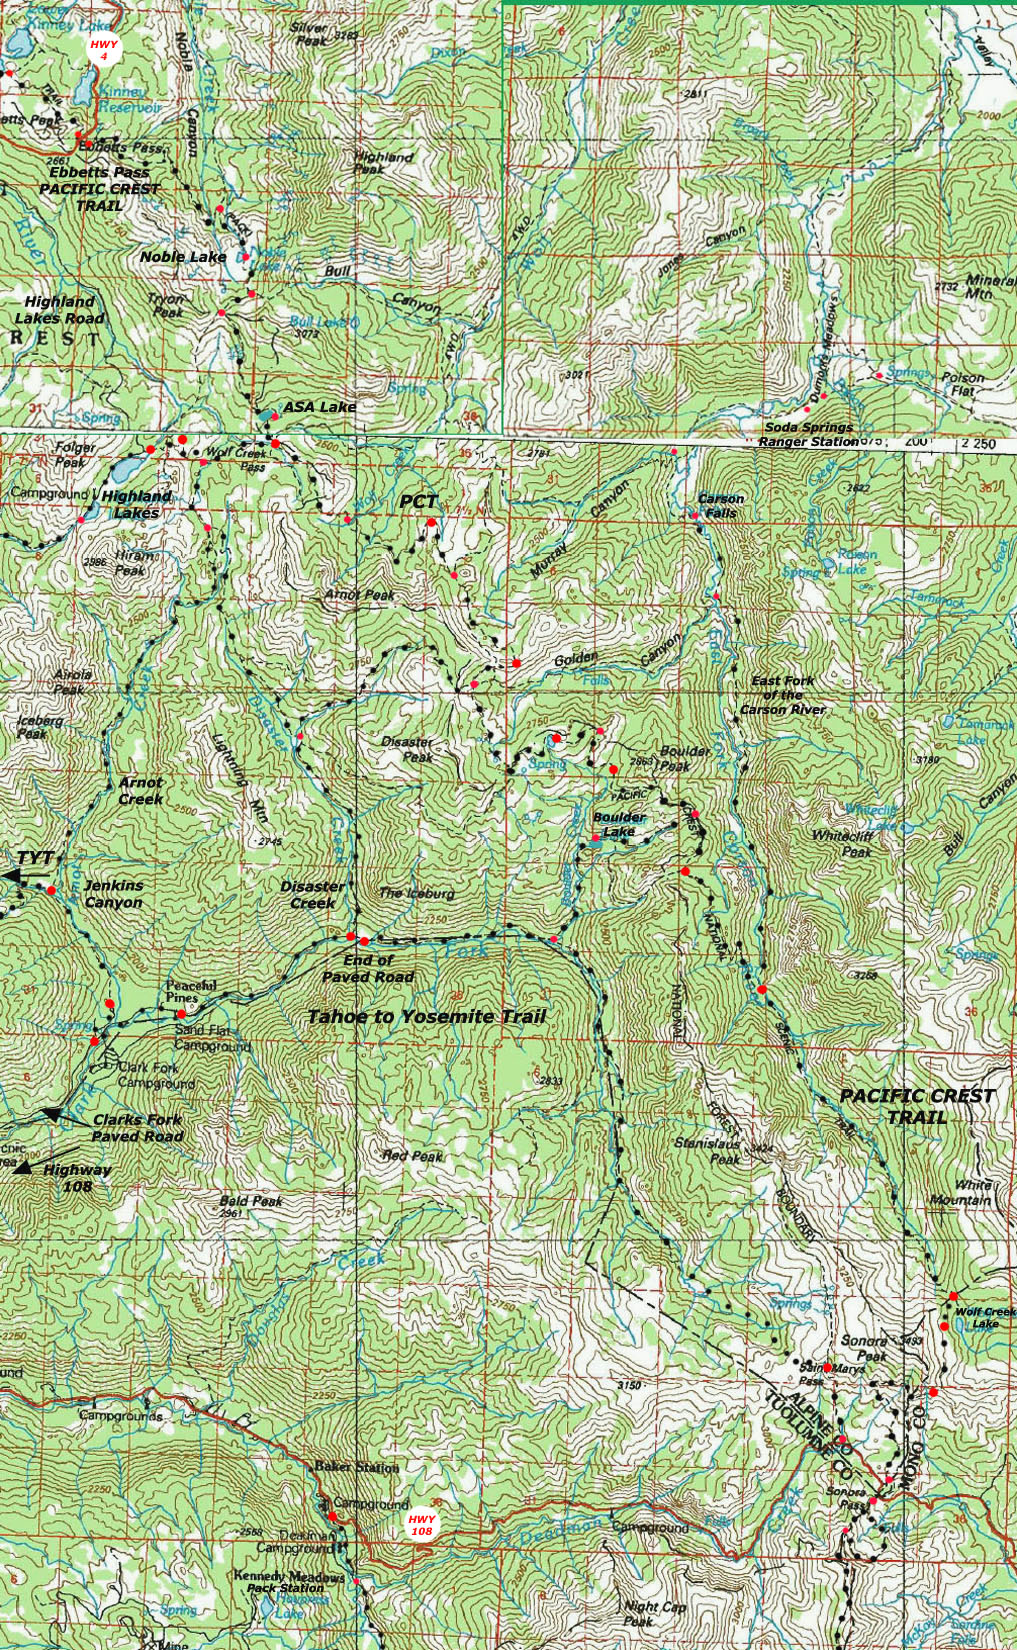 Ebbetts to Sonora Pass topo map of the Pacific Crest Trail across the Carson Iceberg Wilderness.